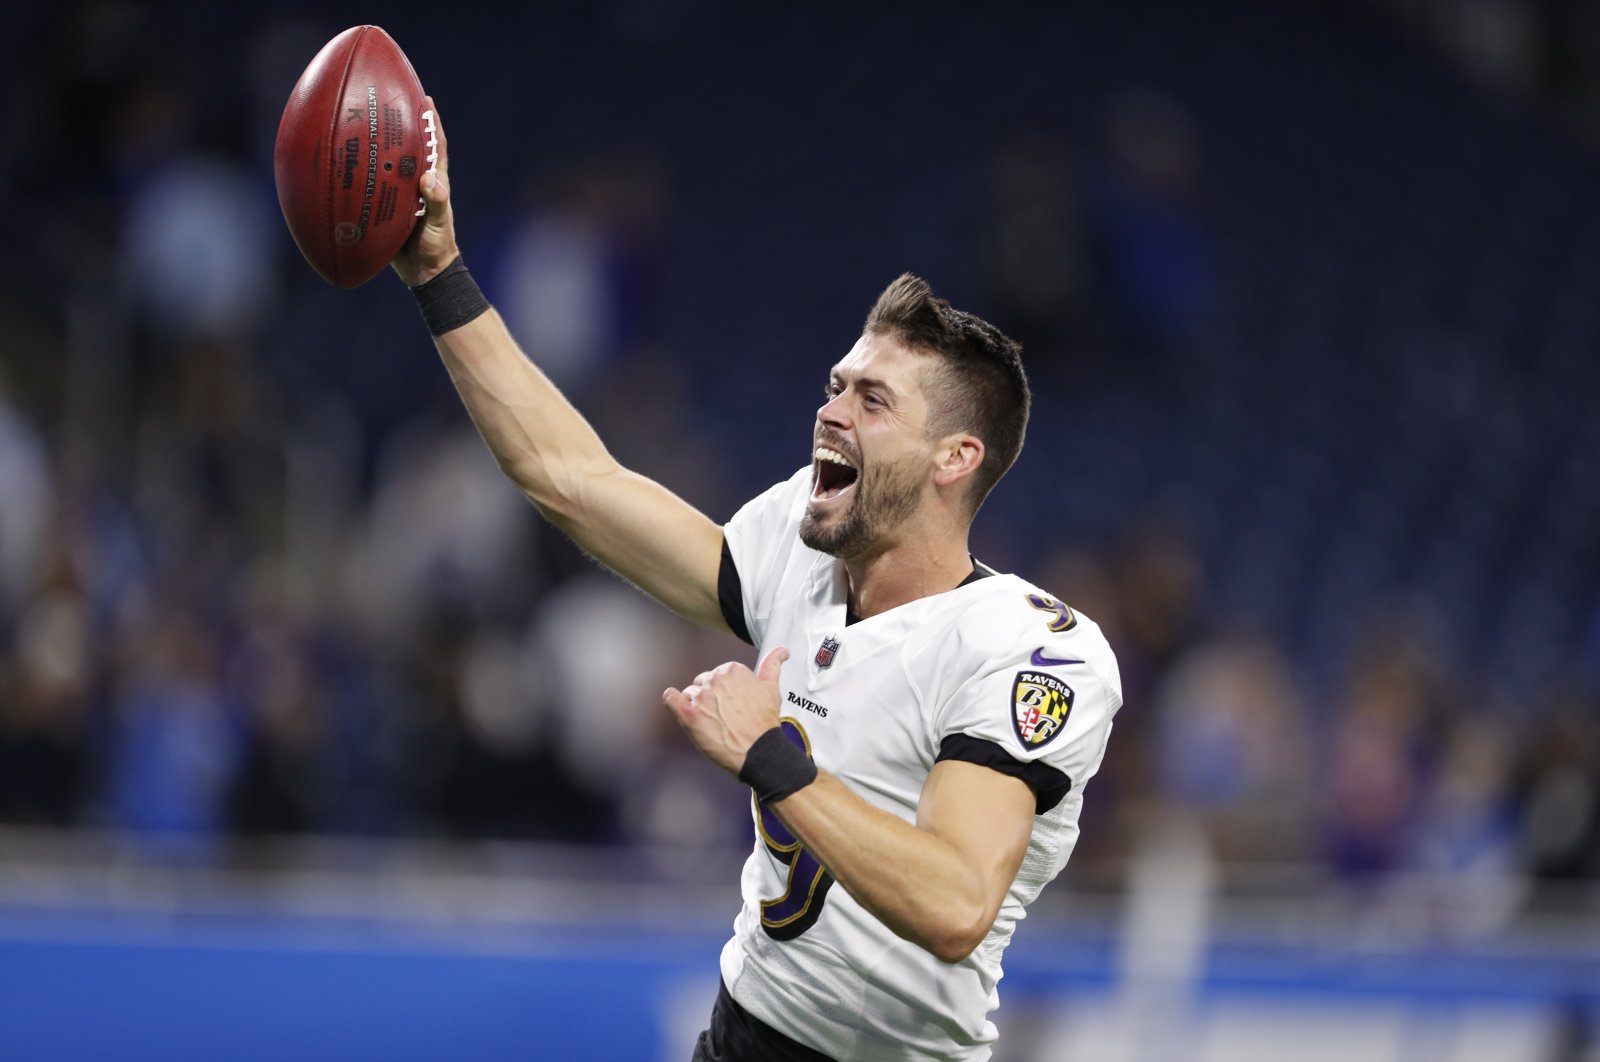 Baltimore Ravens kicker Justin Tucker (9) celebrates while leaving the field after defeating the Detroit Lions at Ford Field, Detroit, Michigan, U.S., Sept. 26, 2021. (Raj Mehta-USA TODAY Sports via Reuters)